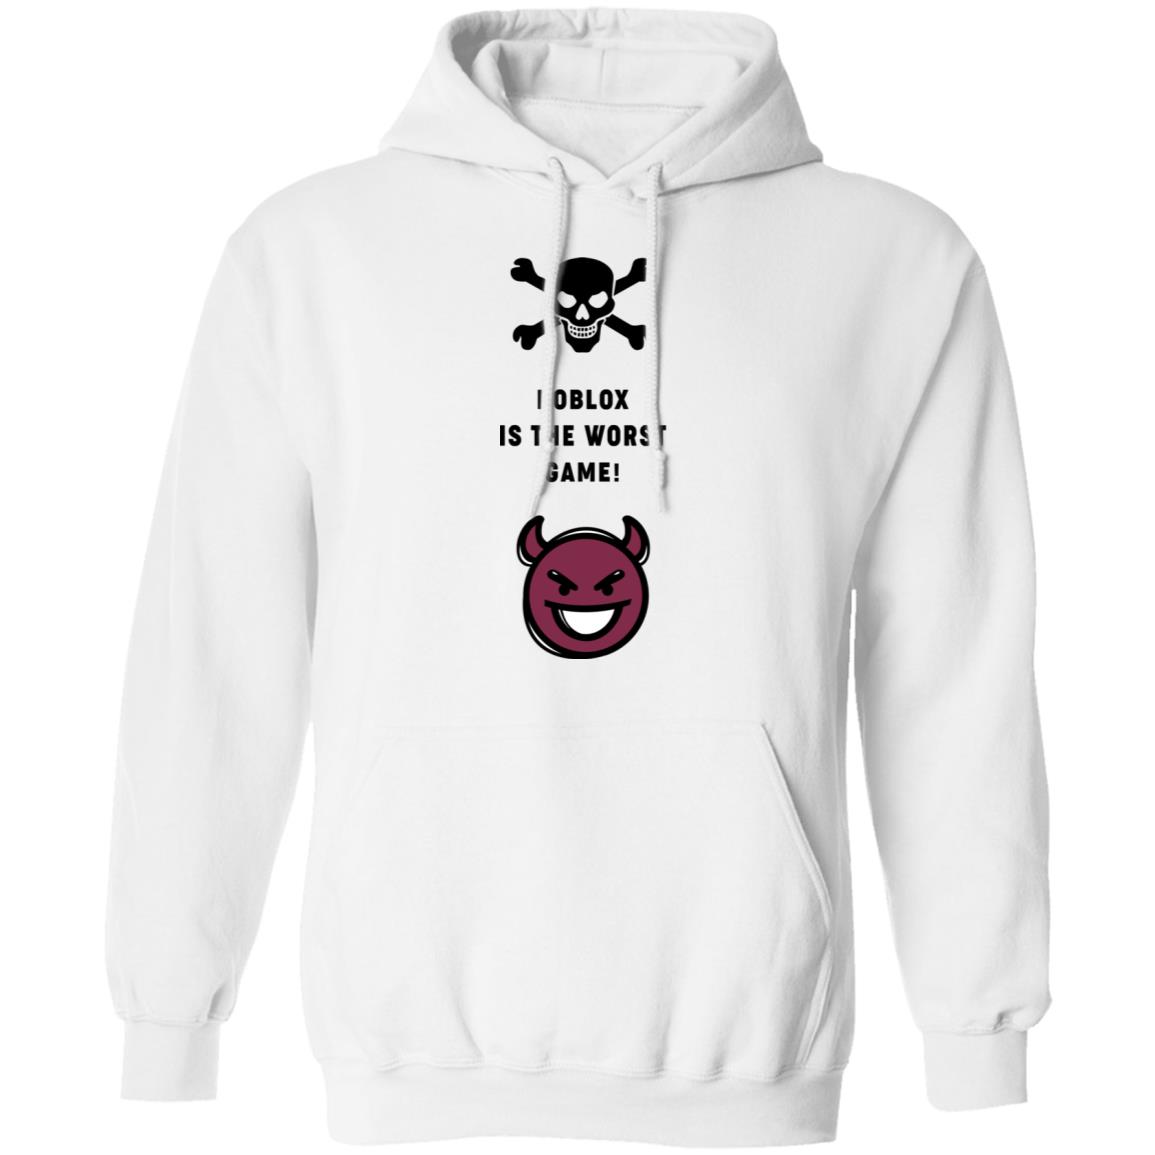 Roblox Is The Worst Game Funny Roblox T Shirts Hoodies Sweater El Real Tex Mex - hoodie with overalls roblox